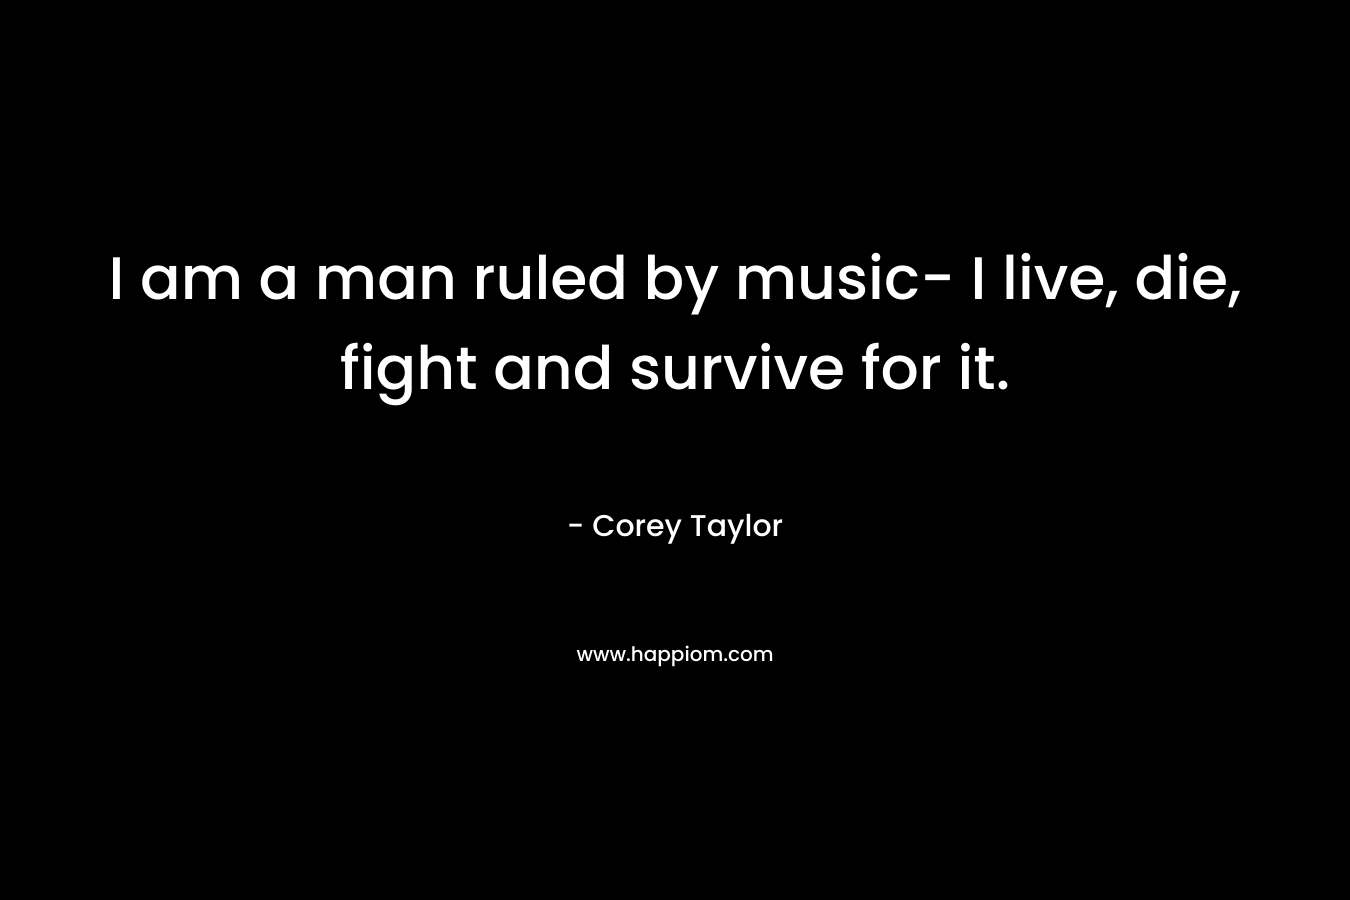 I am a man ruled by music- I live, die, fight and survive for it.